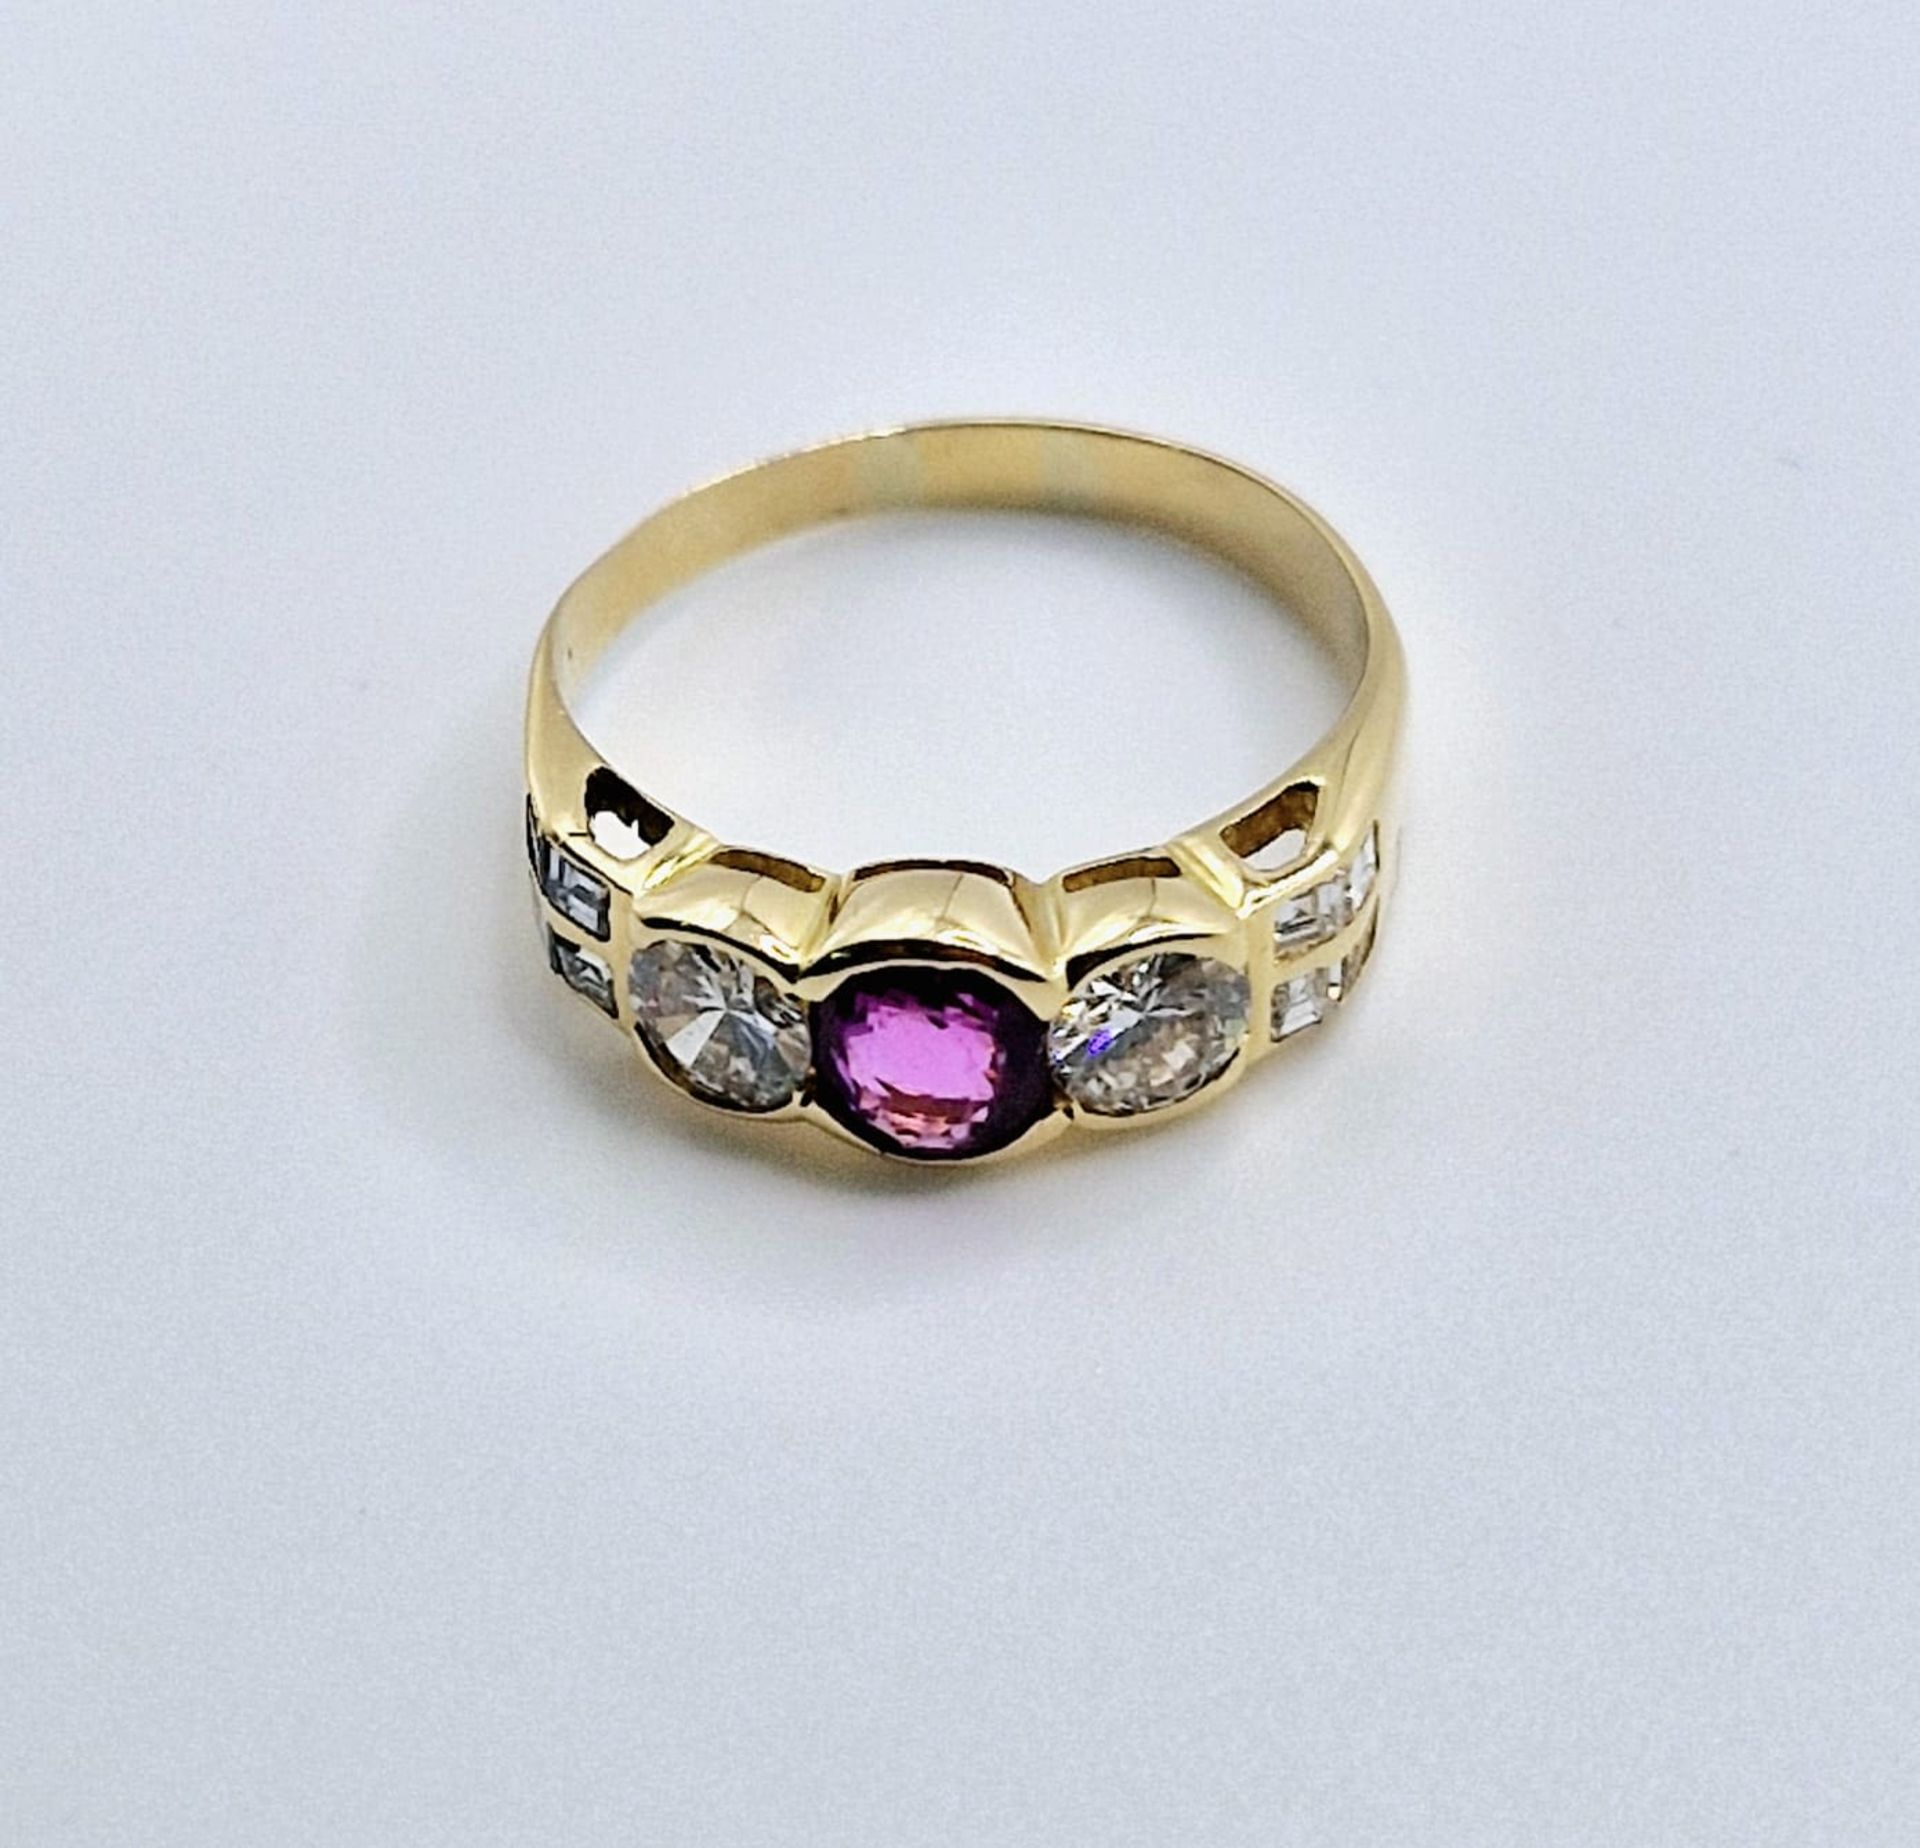 18K YELLOW GOLD - 1.70CT PINK SAPPHIRE & DIAMOND RING - £4K VALUATION - Image 3 of 4